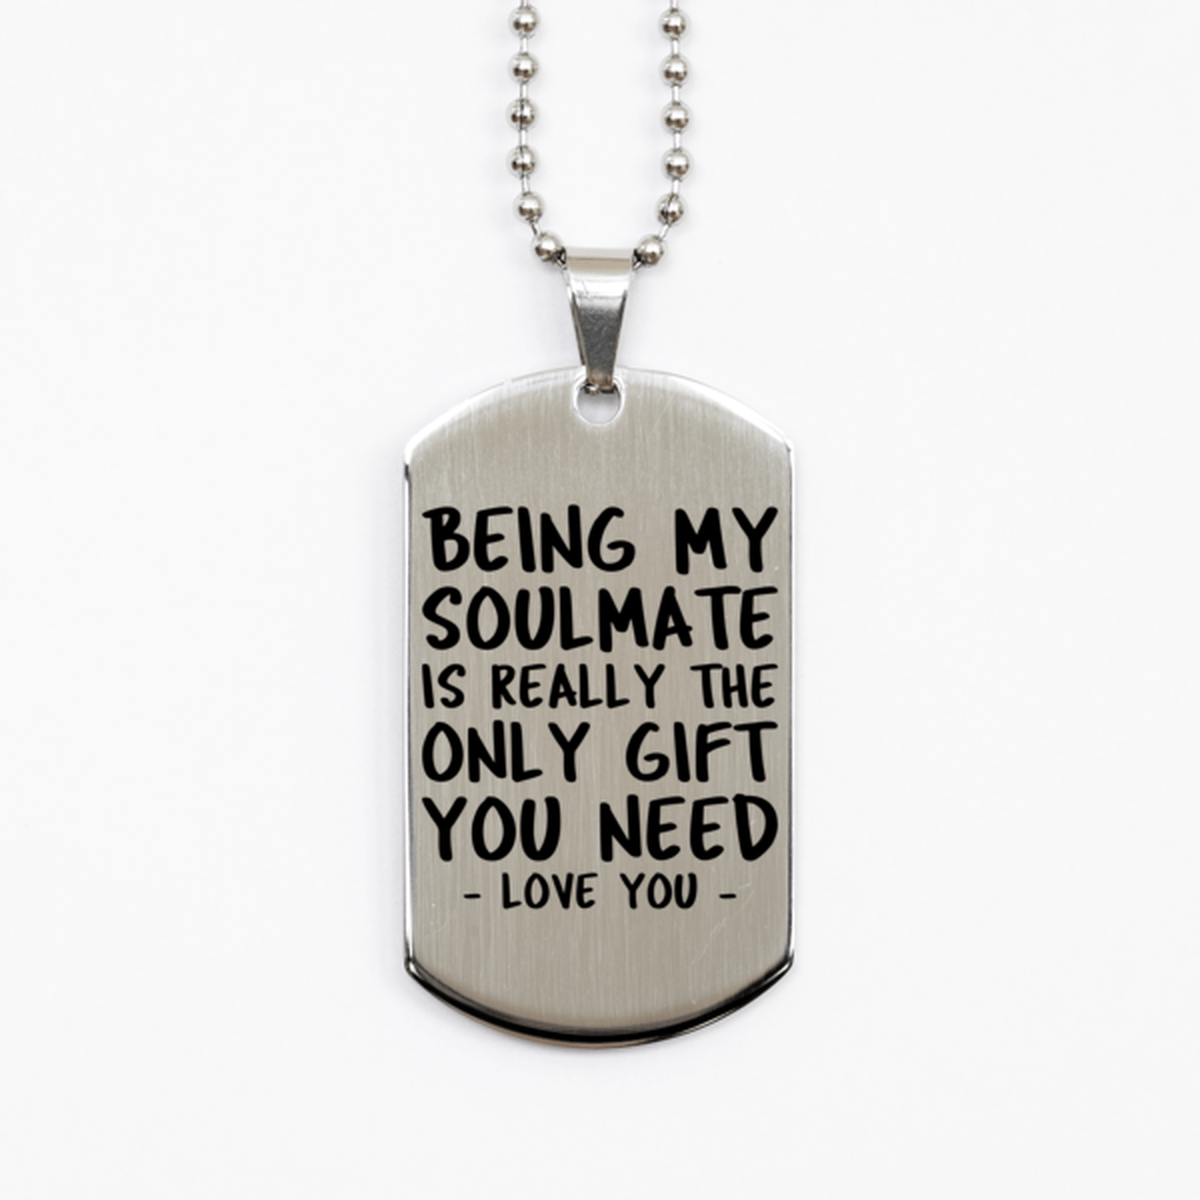 Funny Soulmate Silver Dog Tag Necklace, Being My Soulmate Is Really the Only Gift You Need, Best Birthday Gifts for Soulmate